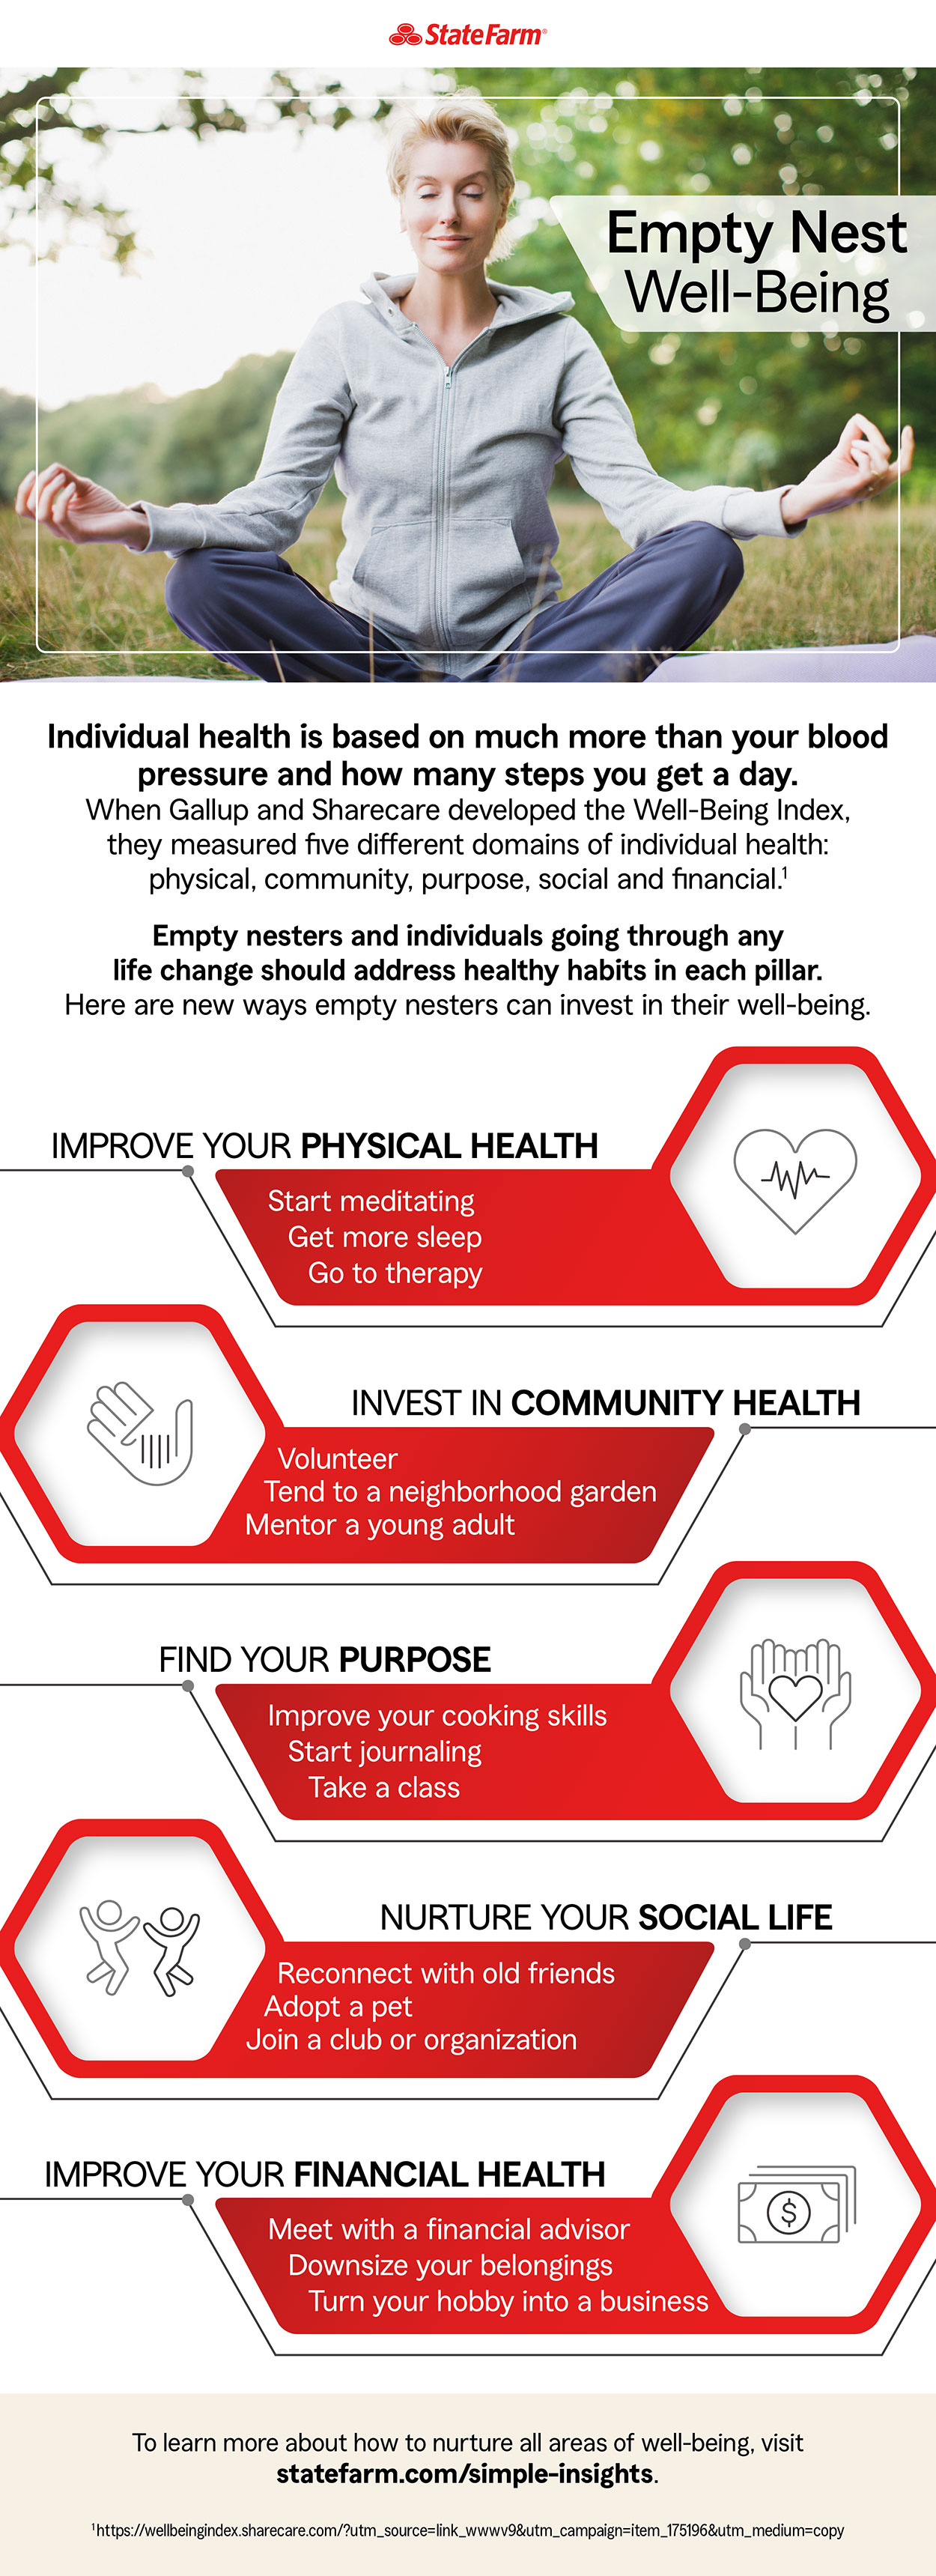 Infographic that shares a variety of ways empty nesters can improve their health and well-being.